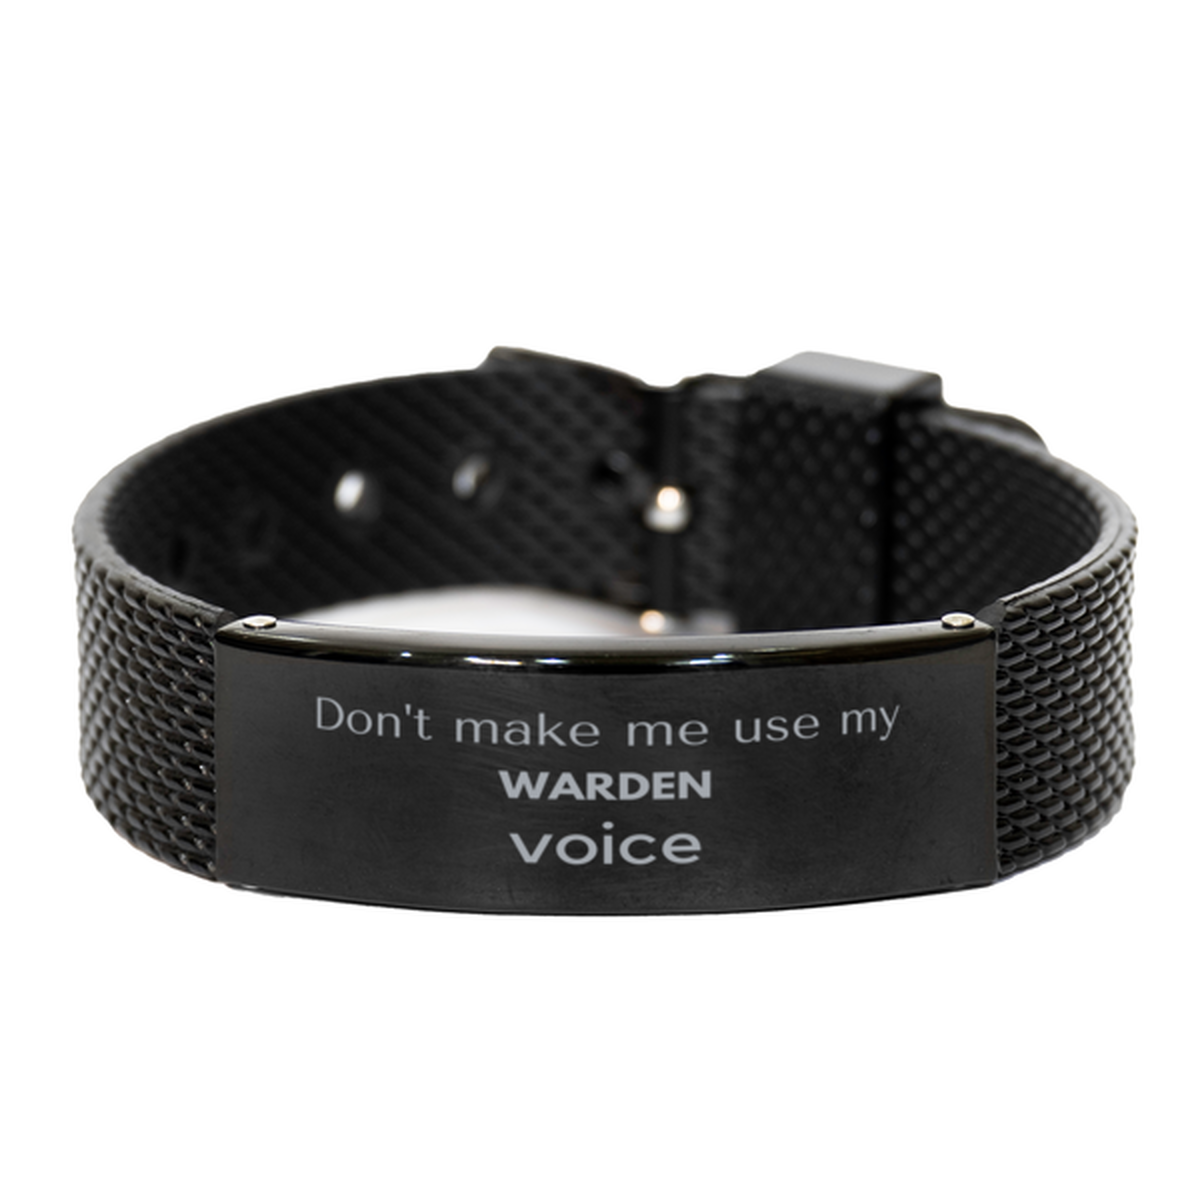 Don't make me use my Warden voice, Sarcasm Warden Gifts, Christmas Warden Black Shark Mesh Bracelet Birthday Unique Gifts For Warden Coworkers, Men, Women, Colleague, Friends